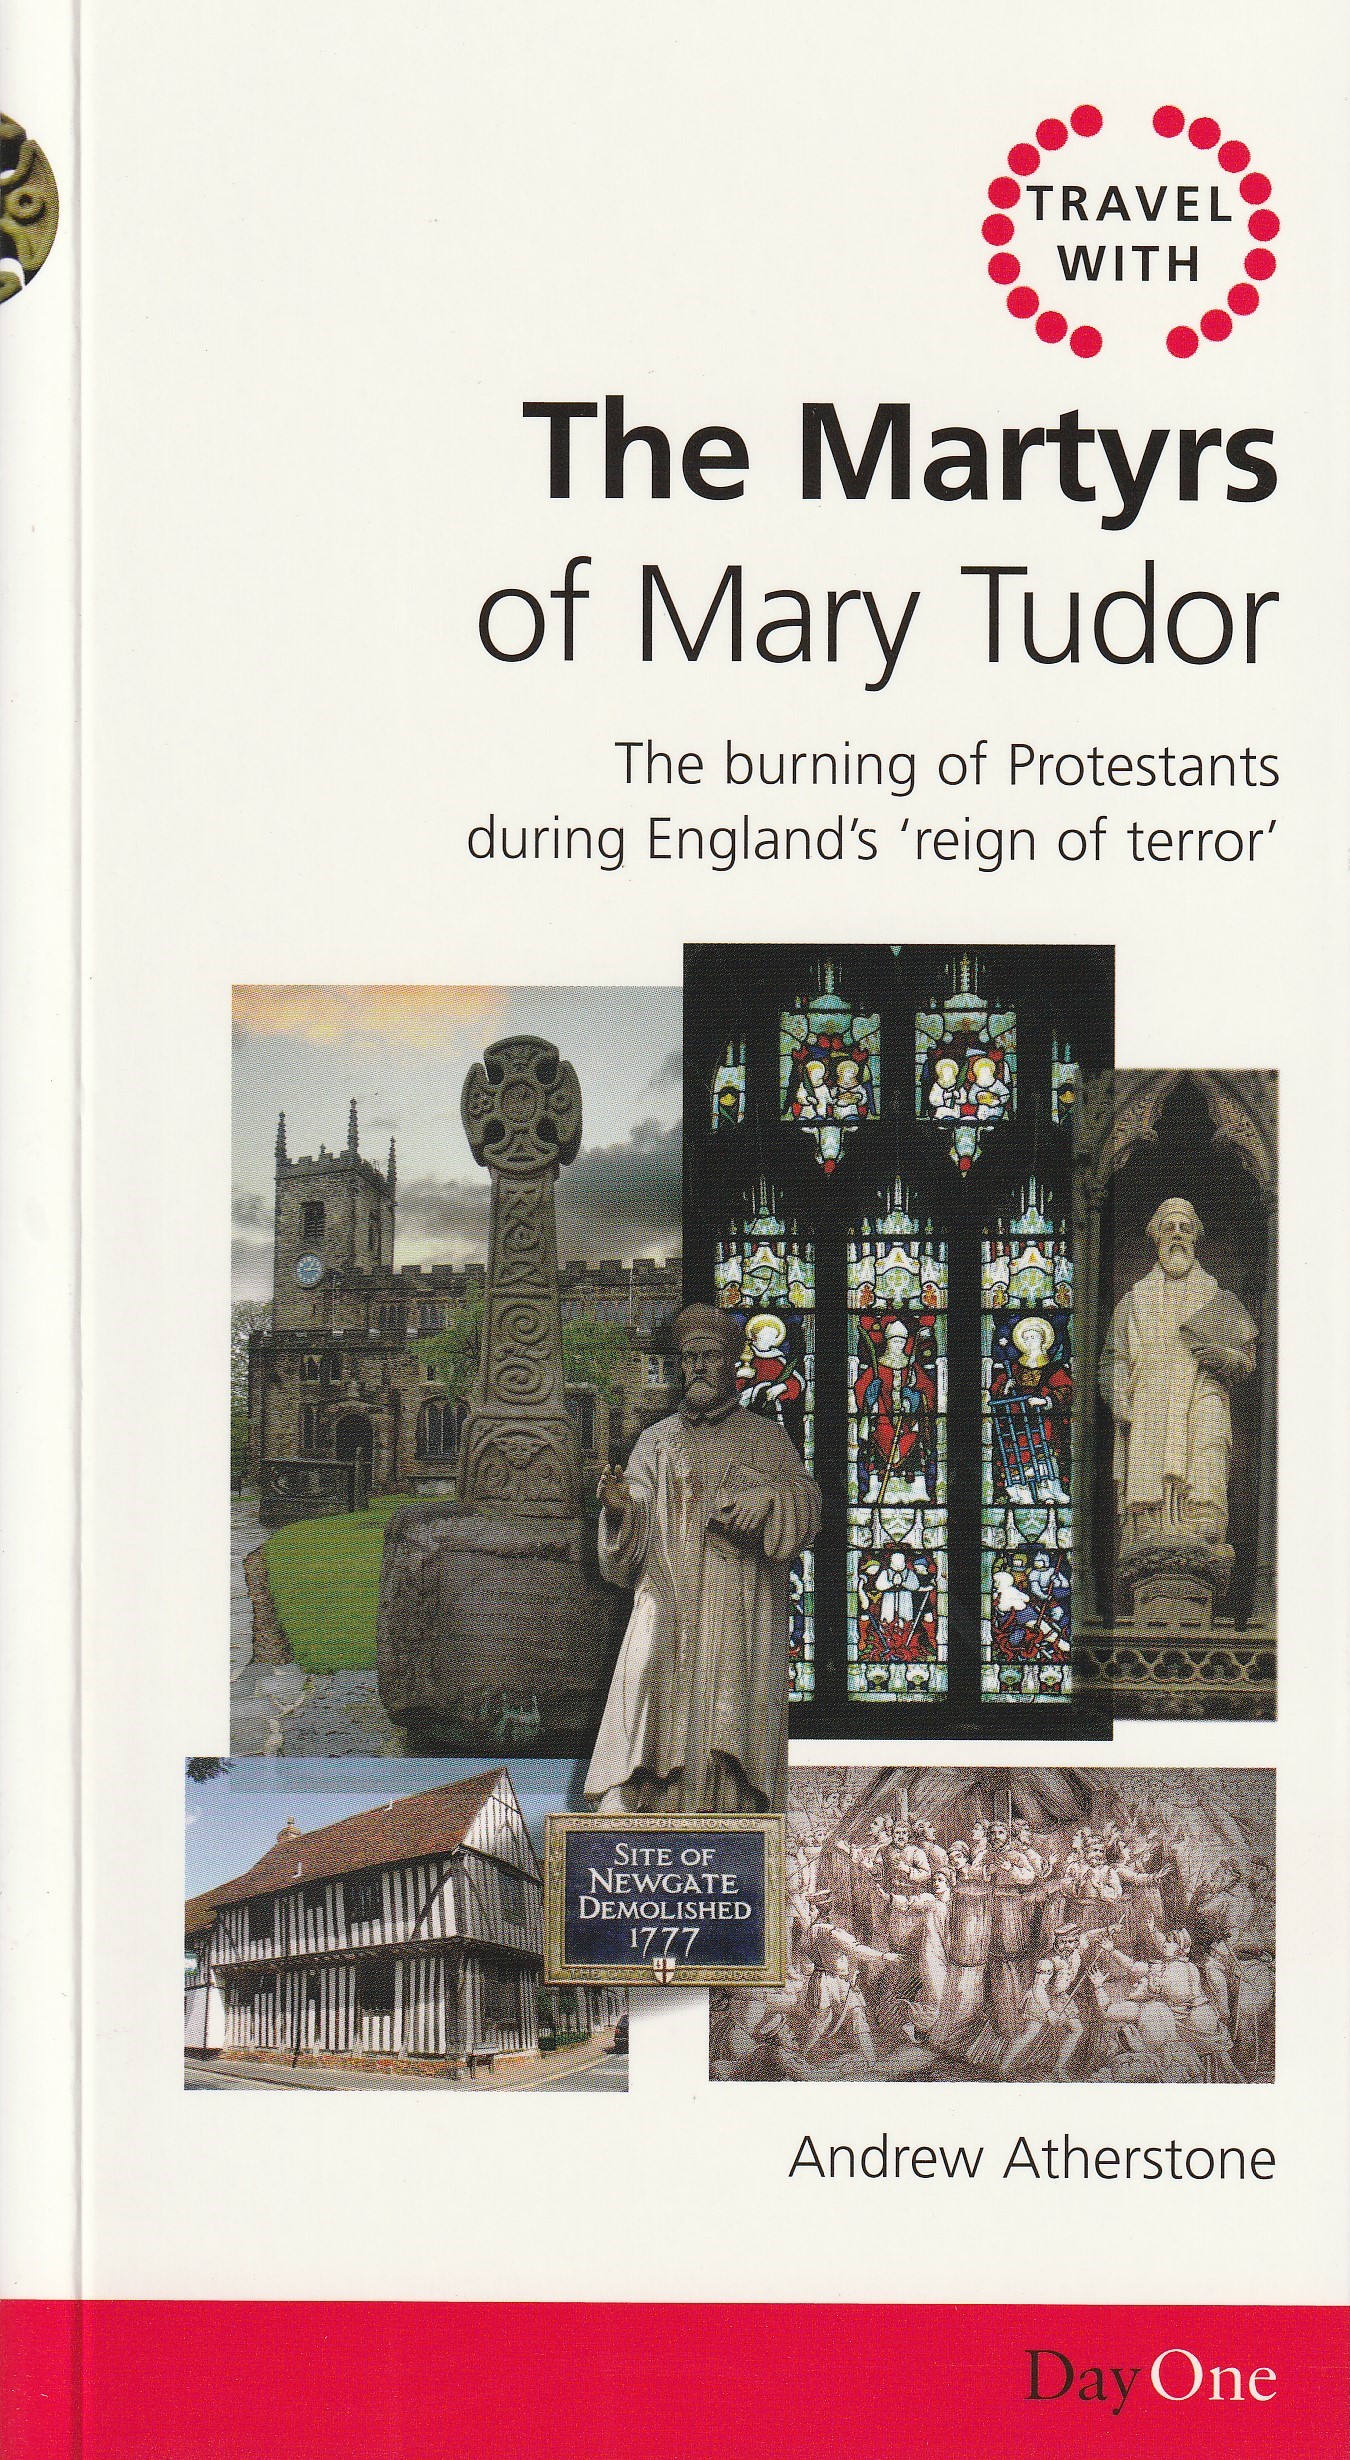 Travel with the Martyrs of Mary Tudor